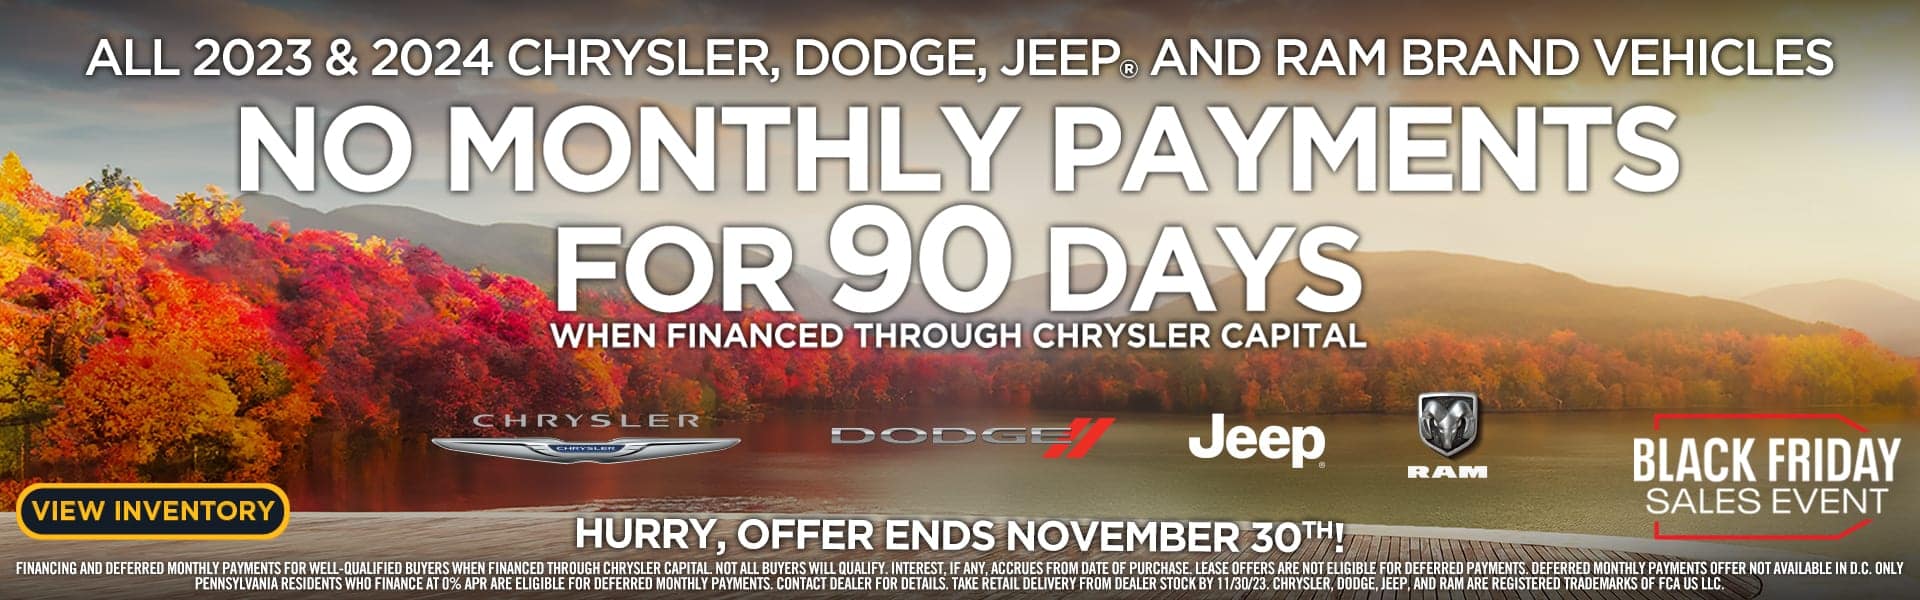 No monthly payments for 90 days